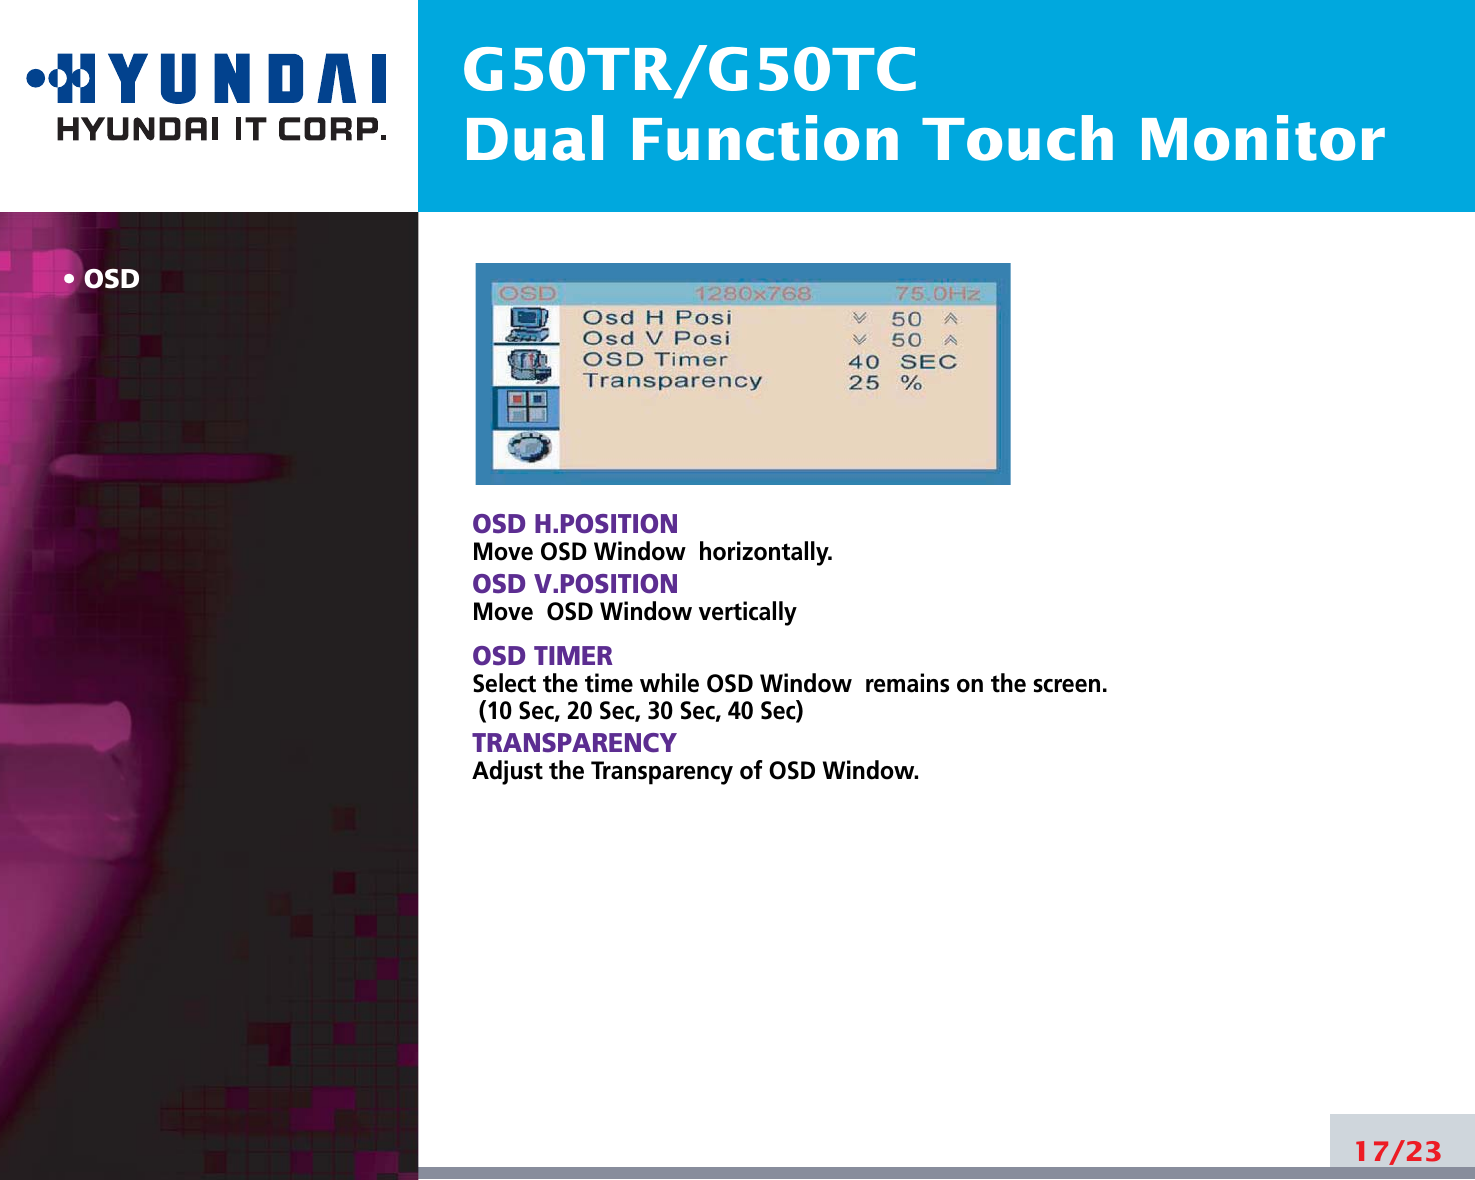 G50TR/G50TCDual Function Touch MonitorOSD17/23OSD H.POSITIONMove OSD Window  horizontally.OSD V.POSITIONMove  OSD Window verticallyOSD TIMERSelect the time while OSD Window  remains on the screen.(10 Sec, 20 Sec, 30 Sec, 40 Sec)TRANSPARENCYAdjust the Transparency of OSD Window.